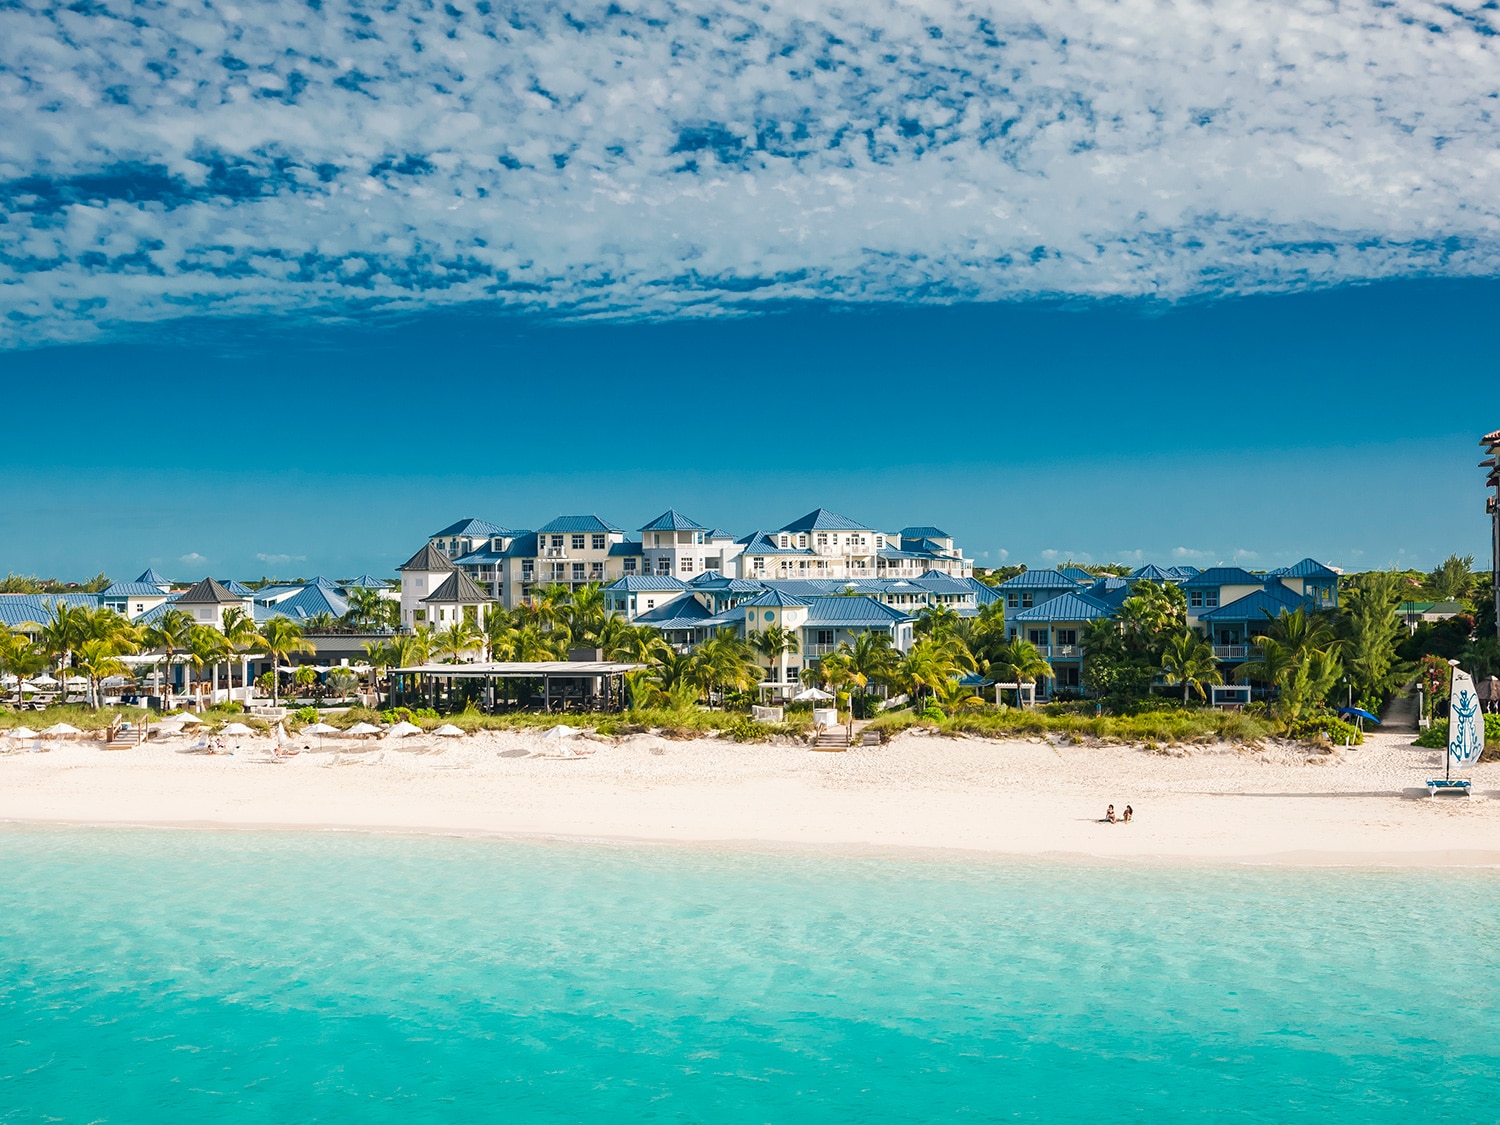 A view of Beaches Turks and Caicos on Grace Bay Beach.